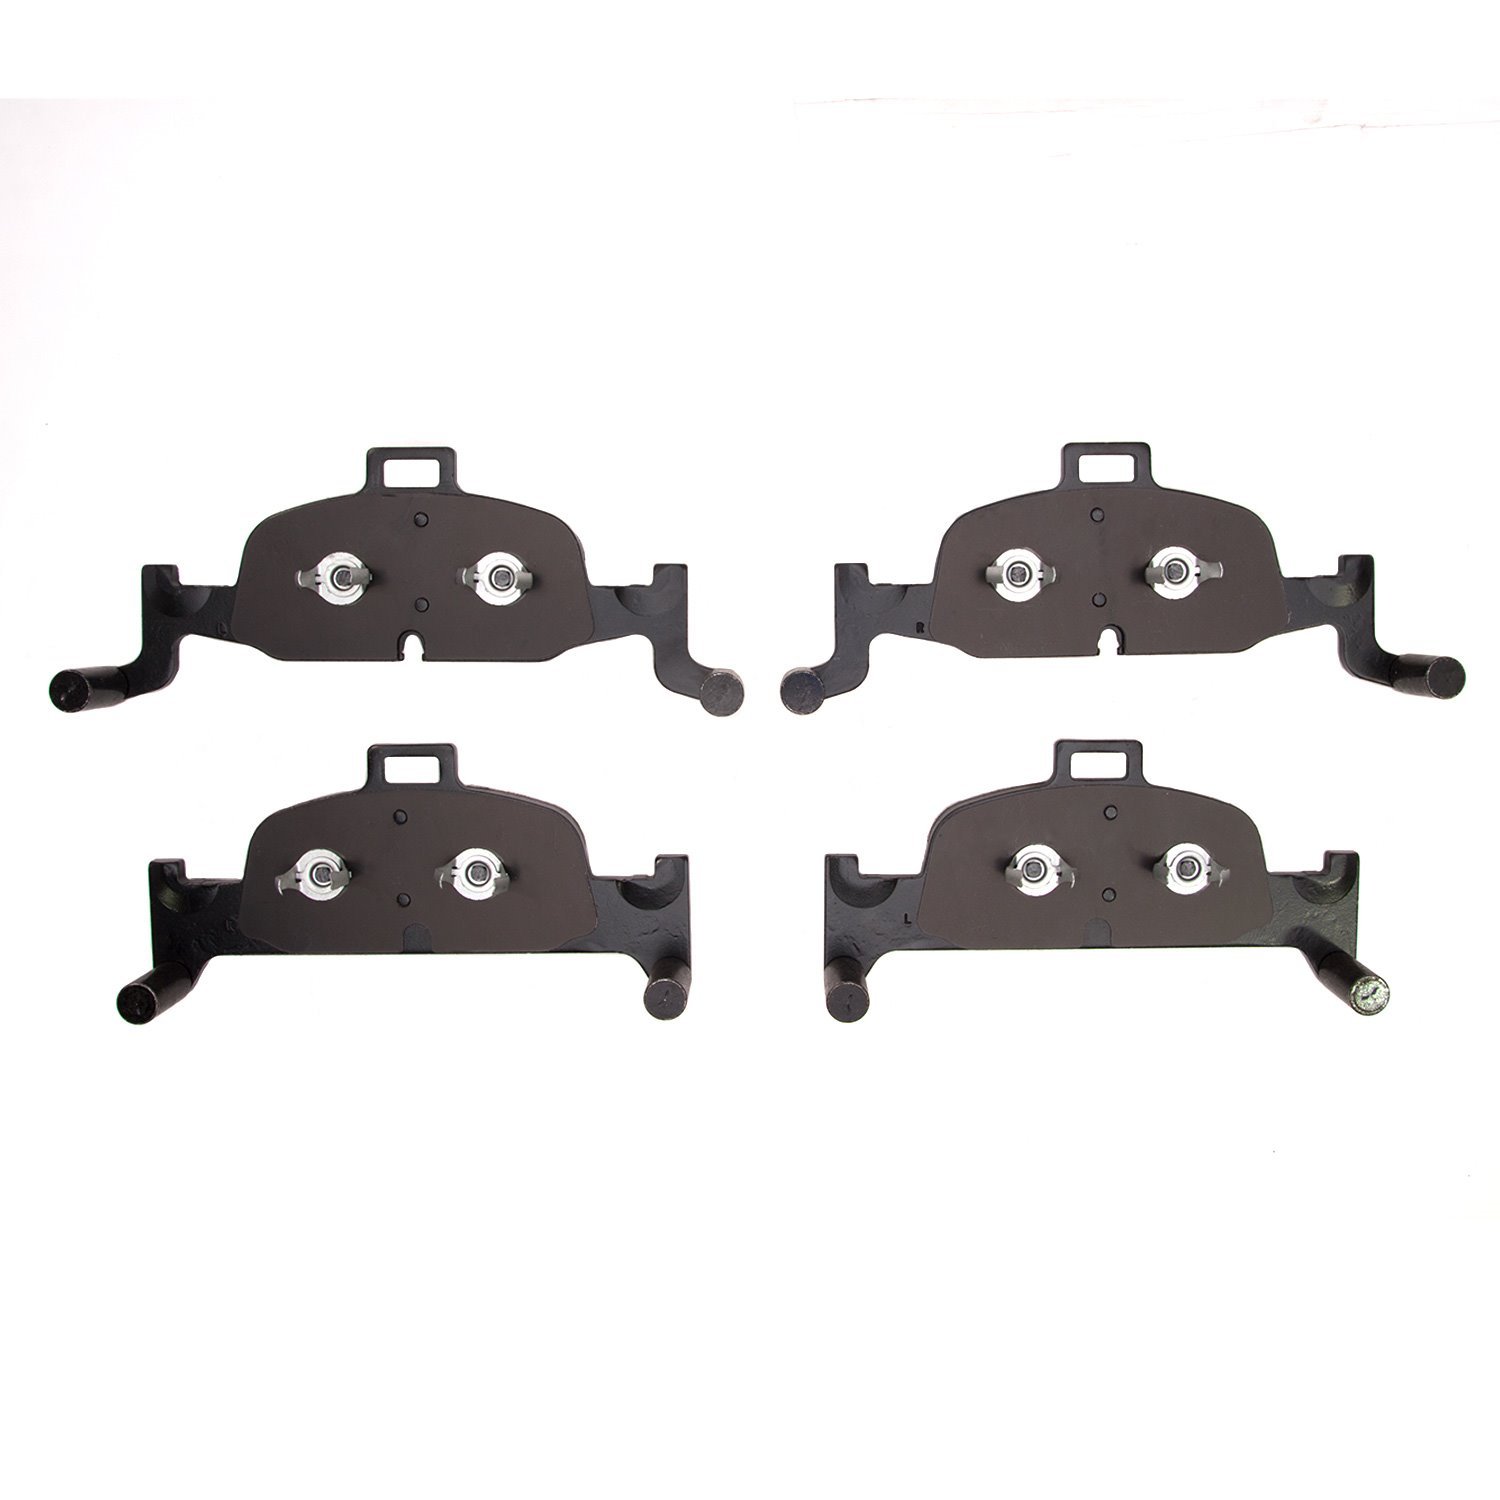 1552-1897-00 5000 Advanced Low-Metallic Brake Pads, Fits Select Audi/Volkswagen, Position: Front